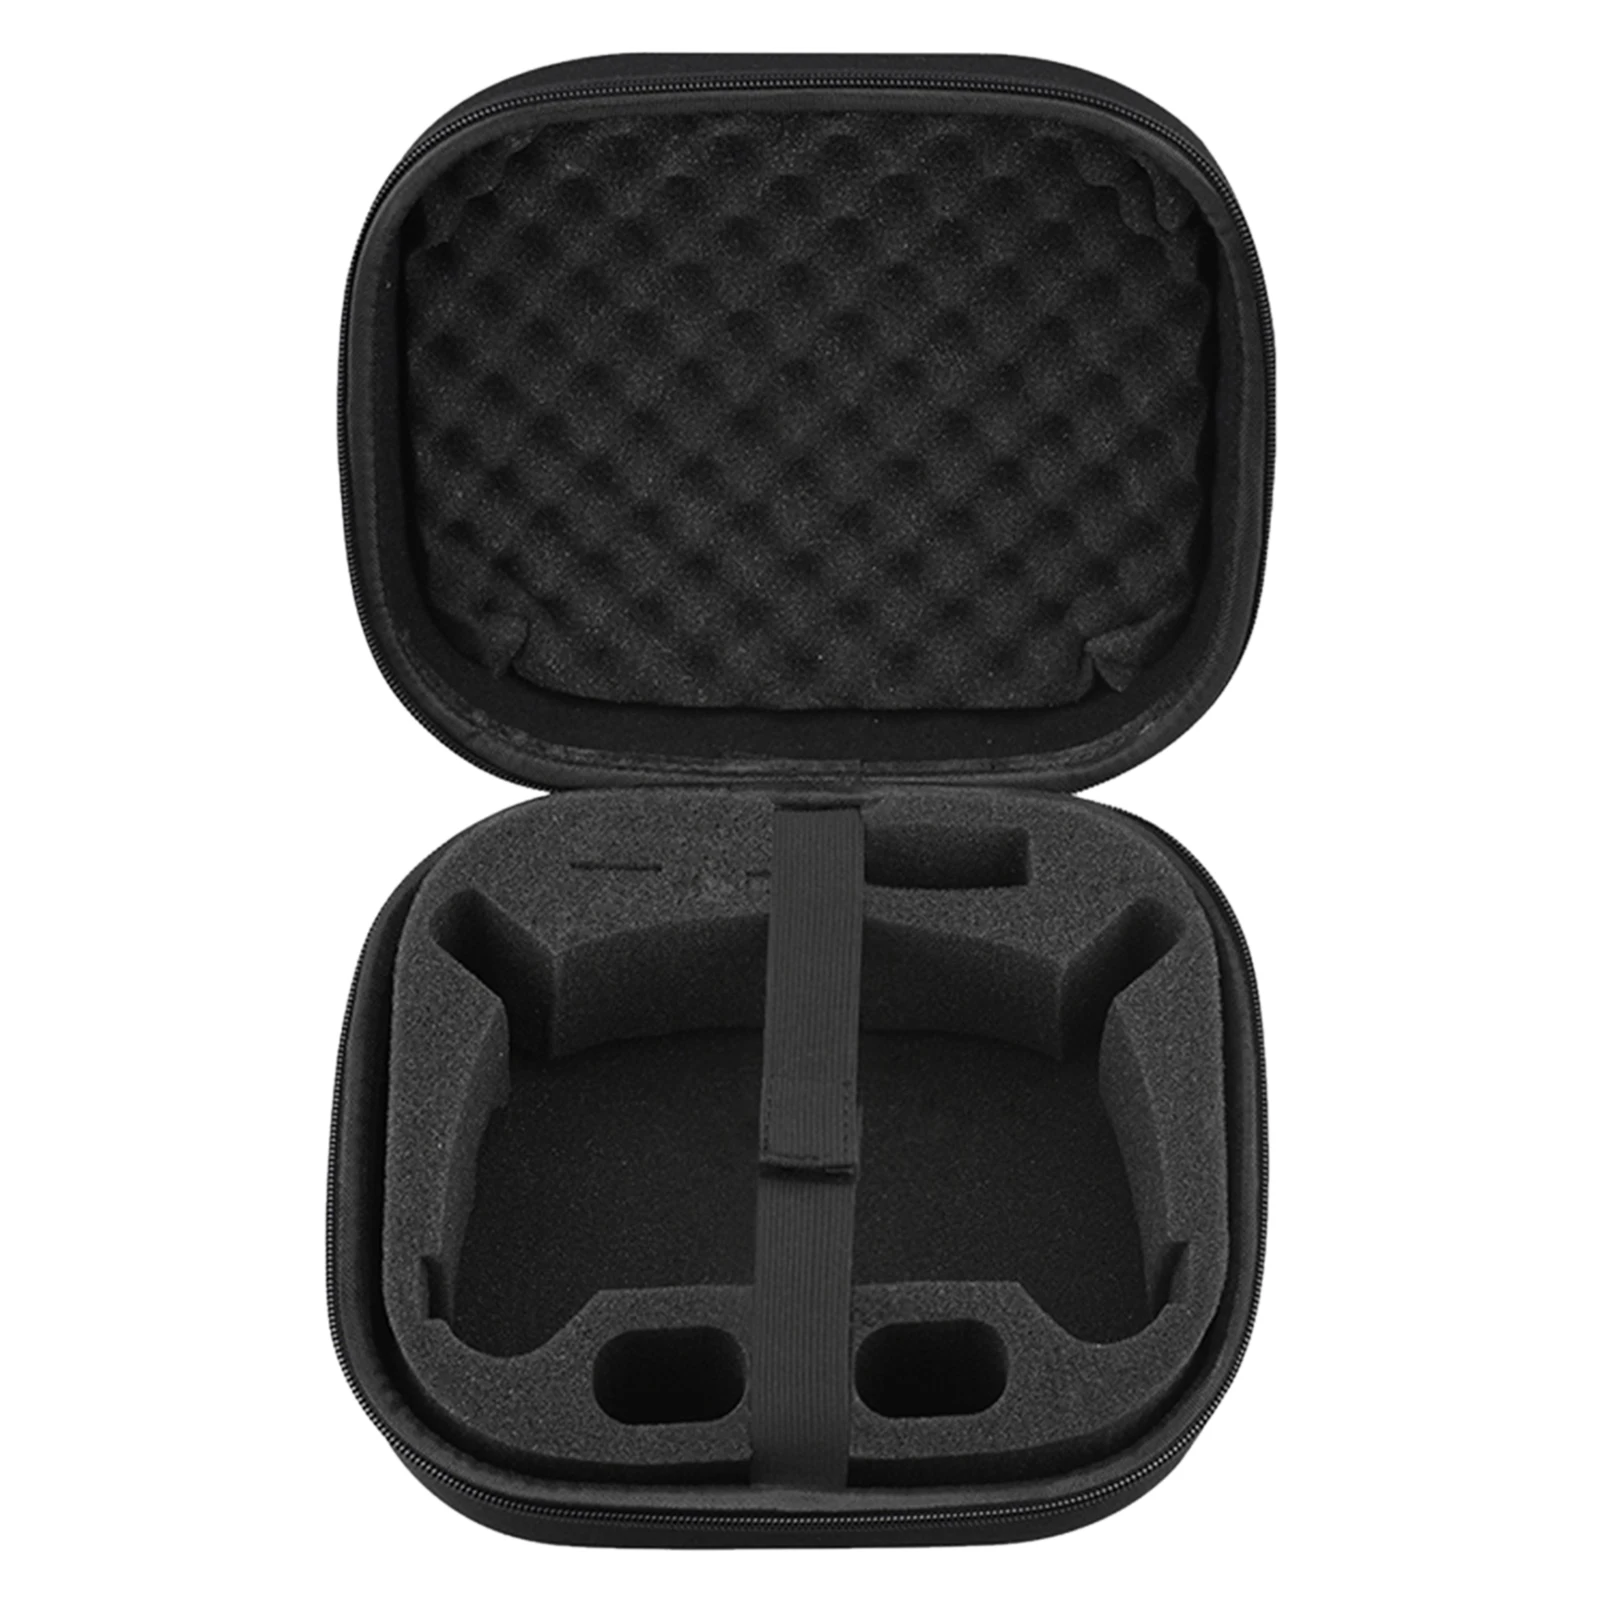 

Carrying Case Travel Portable Multifunction Flying Glasses Anti Scratch Dirt Resistant Drone Accessories Nylon For DJI FPV Combo